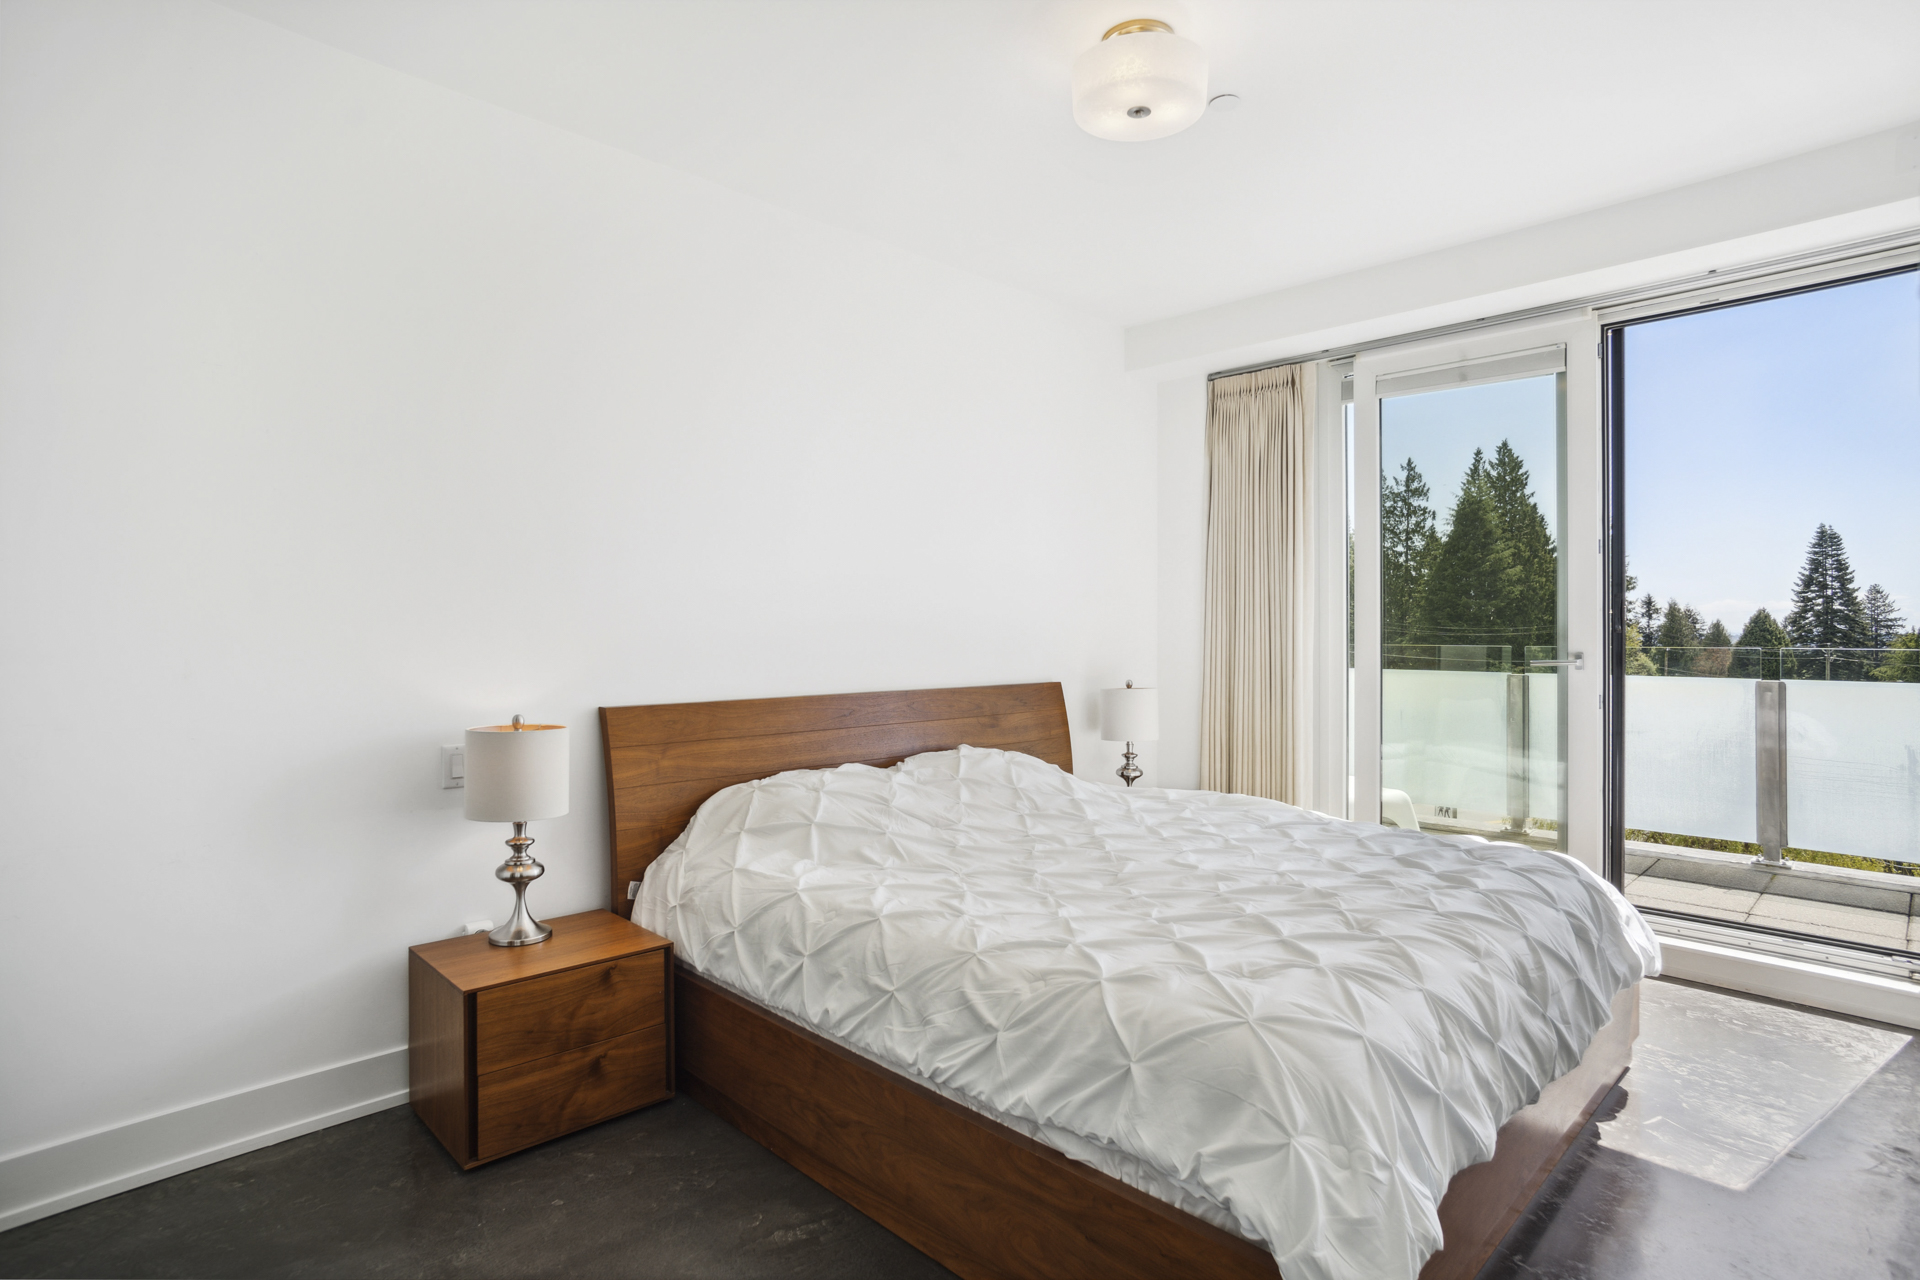 303 650 Evergreen Place, North Vancouver - For sale by Rossetti Realty - photo 5